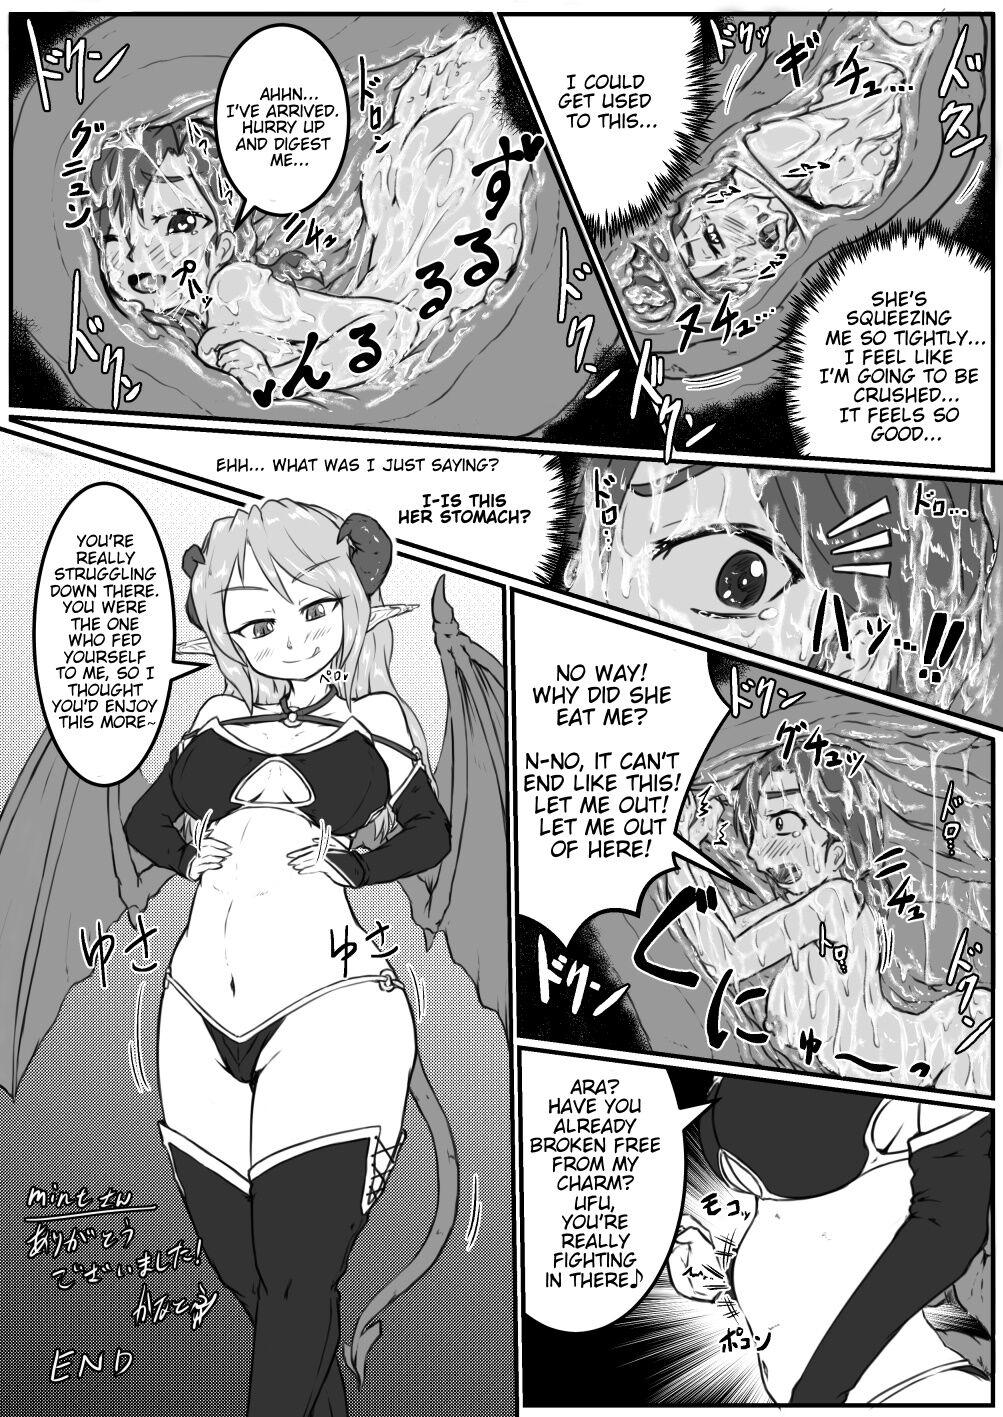 Swallowed by Big Sister Succubus 4